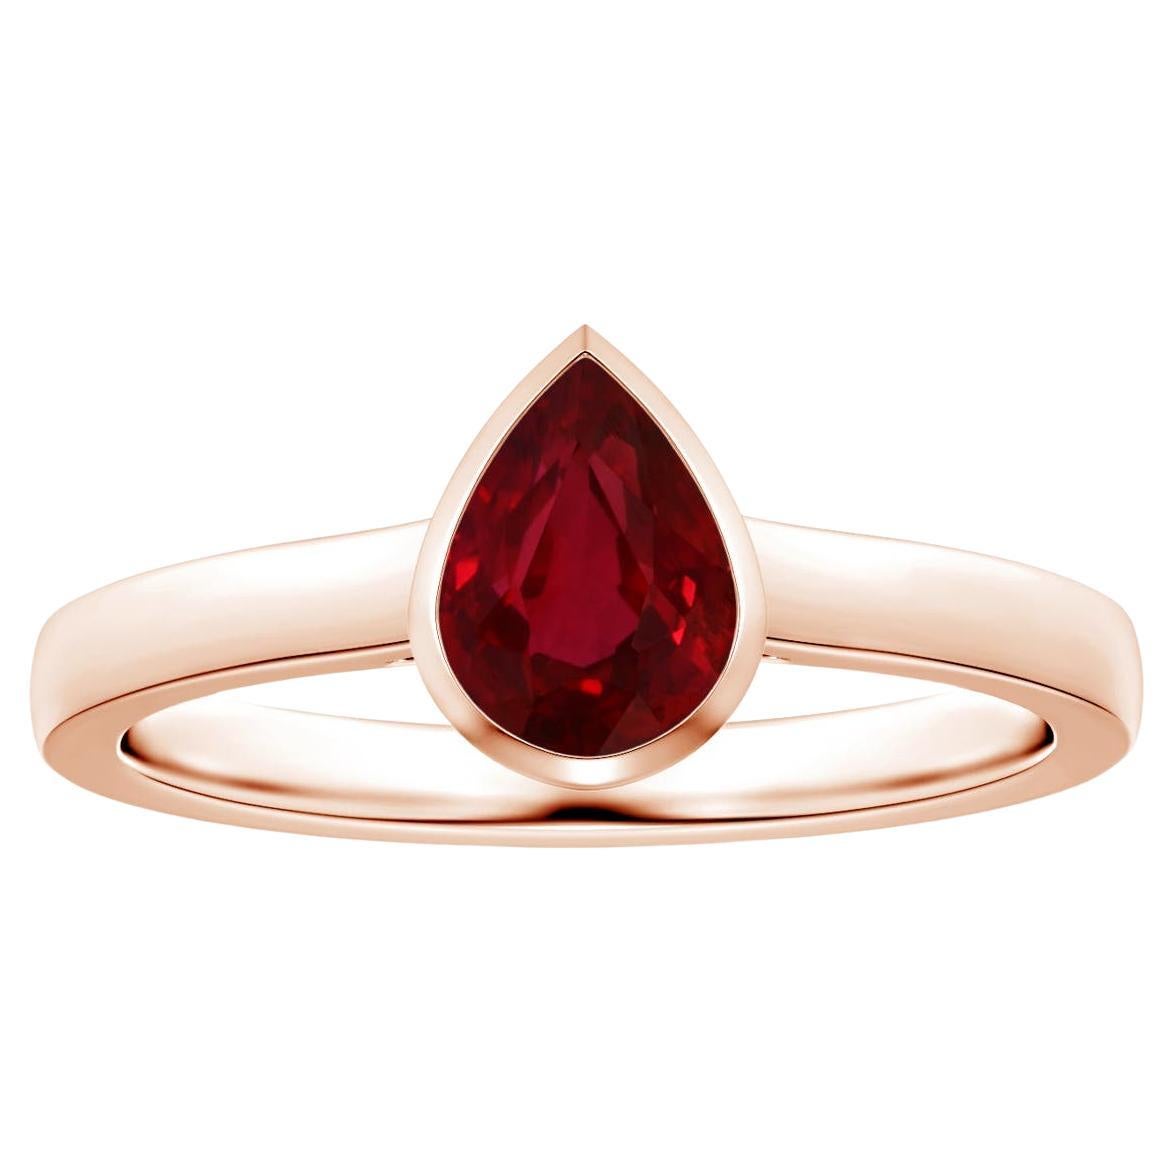 ANGARA Bezel-Set GIA Certified Pear-Shaped Ruby Solitaire Ring in Rose Gold